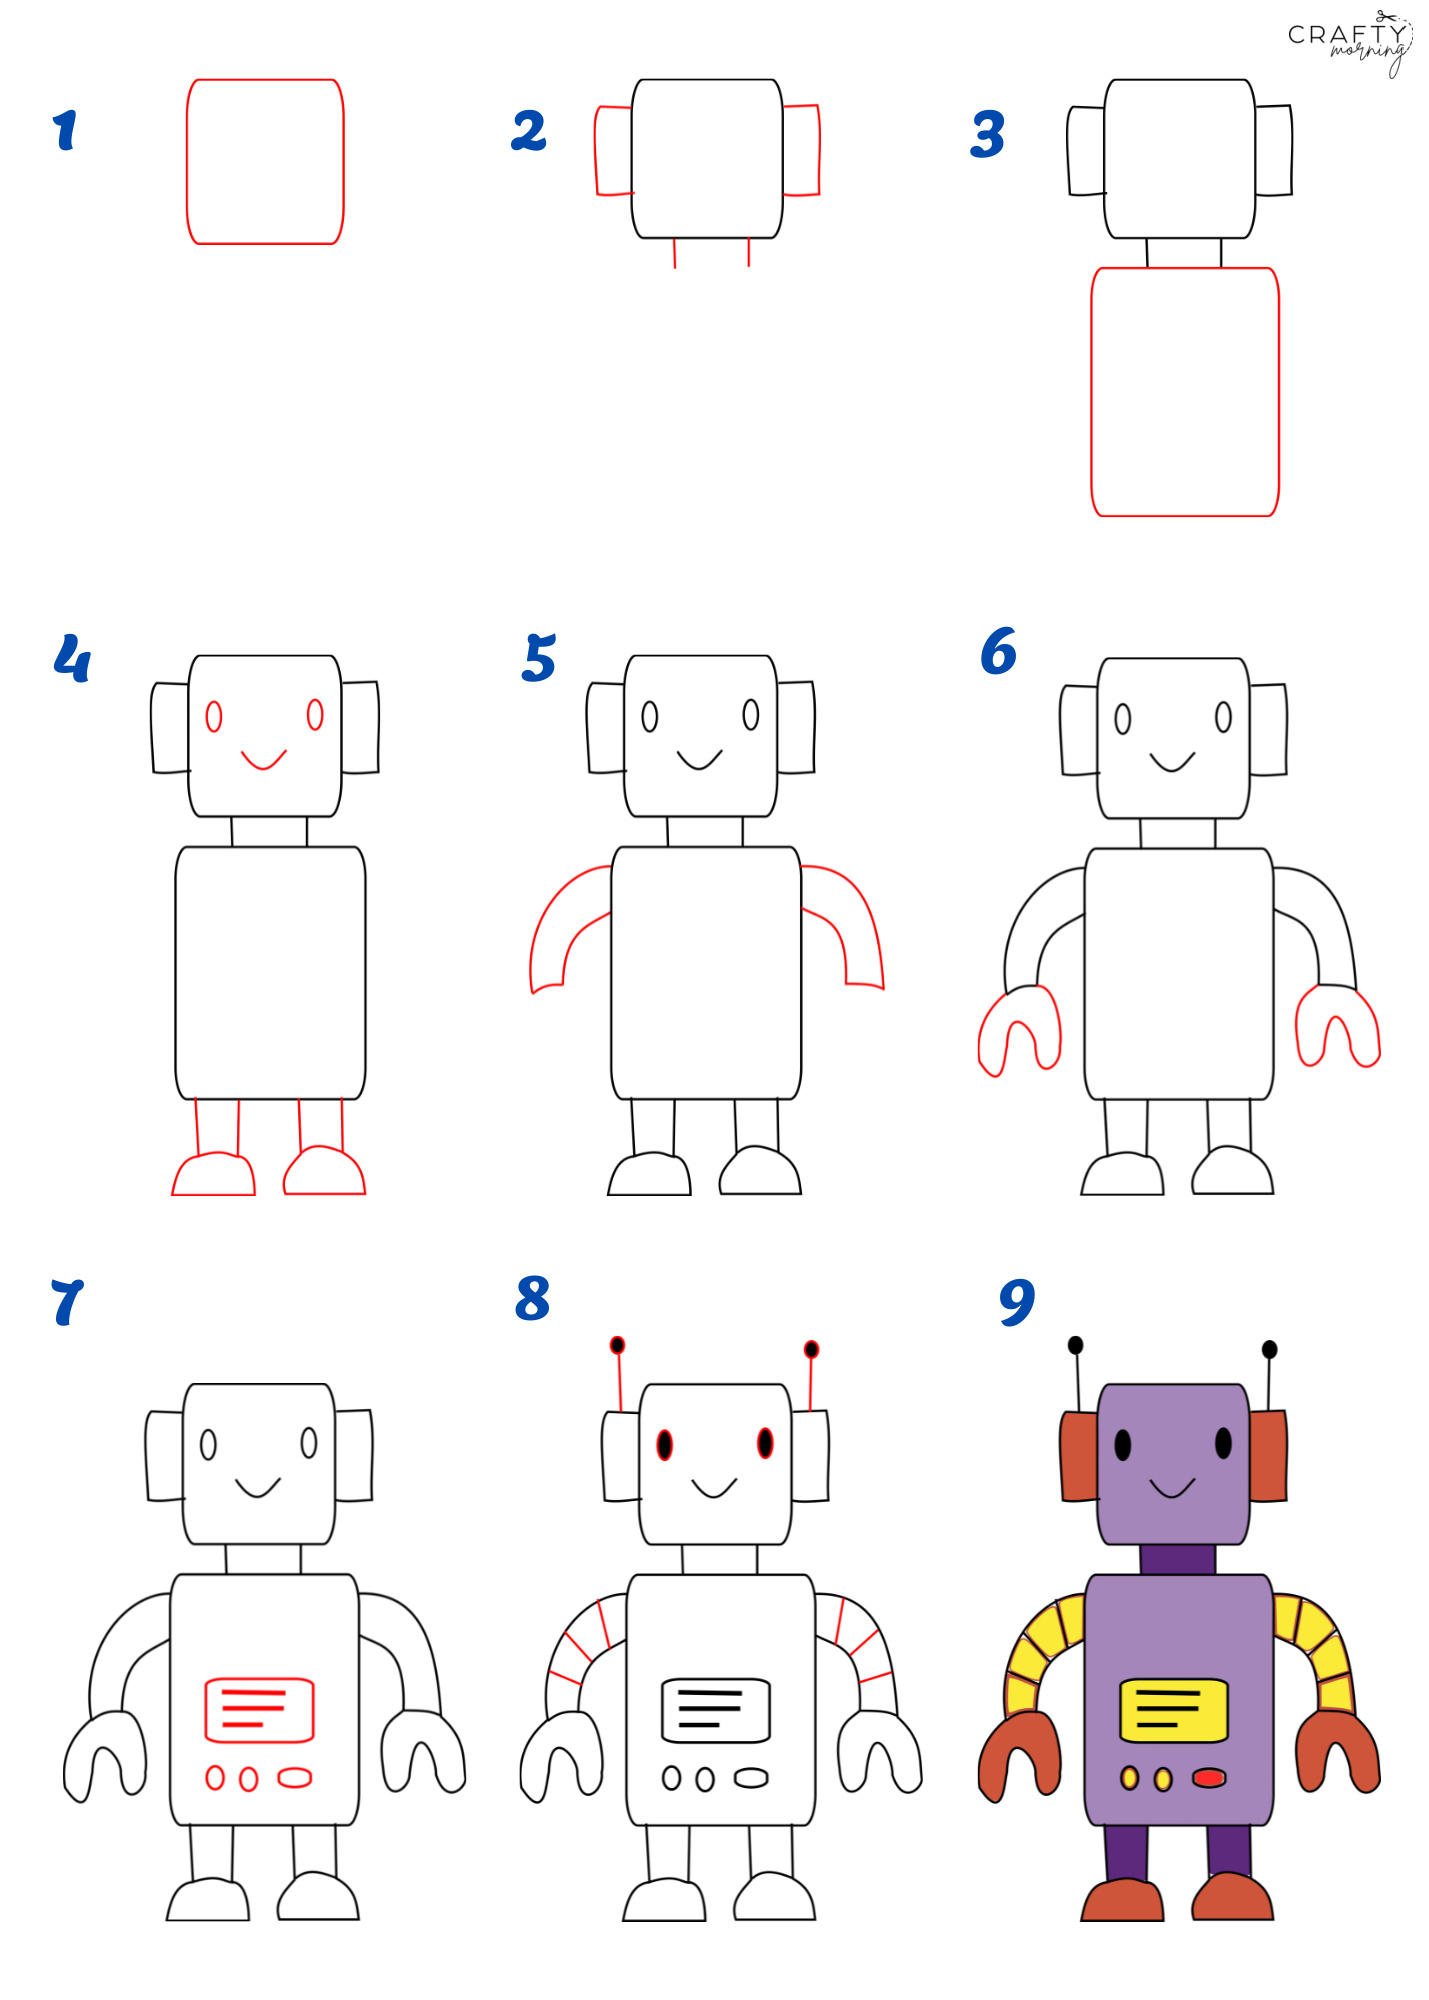 Robot Drawing Tutorial - How to draw Robot step by step